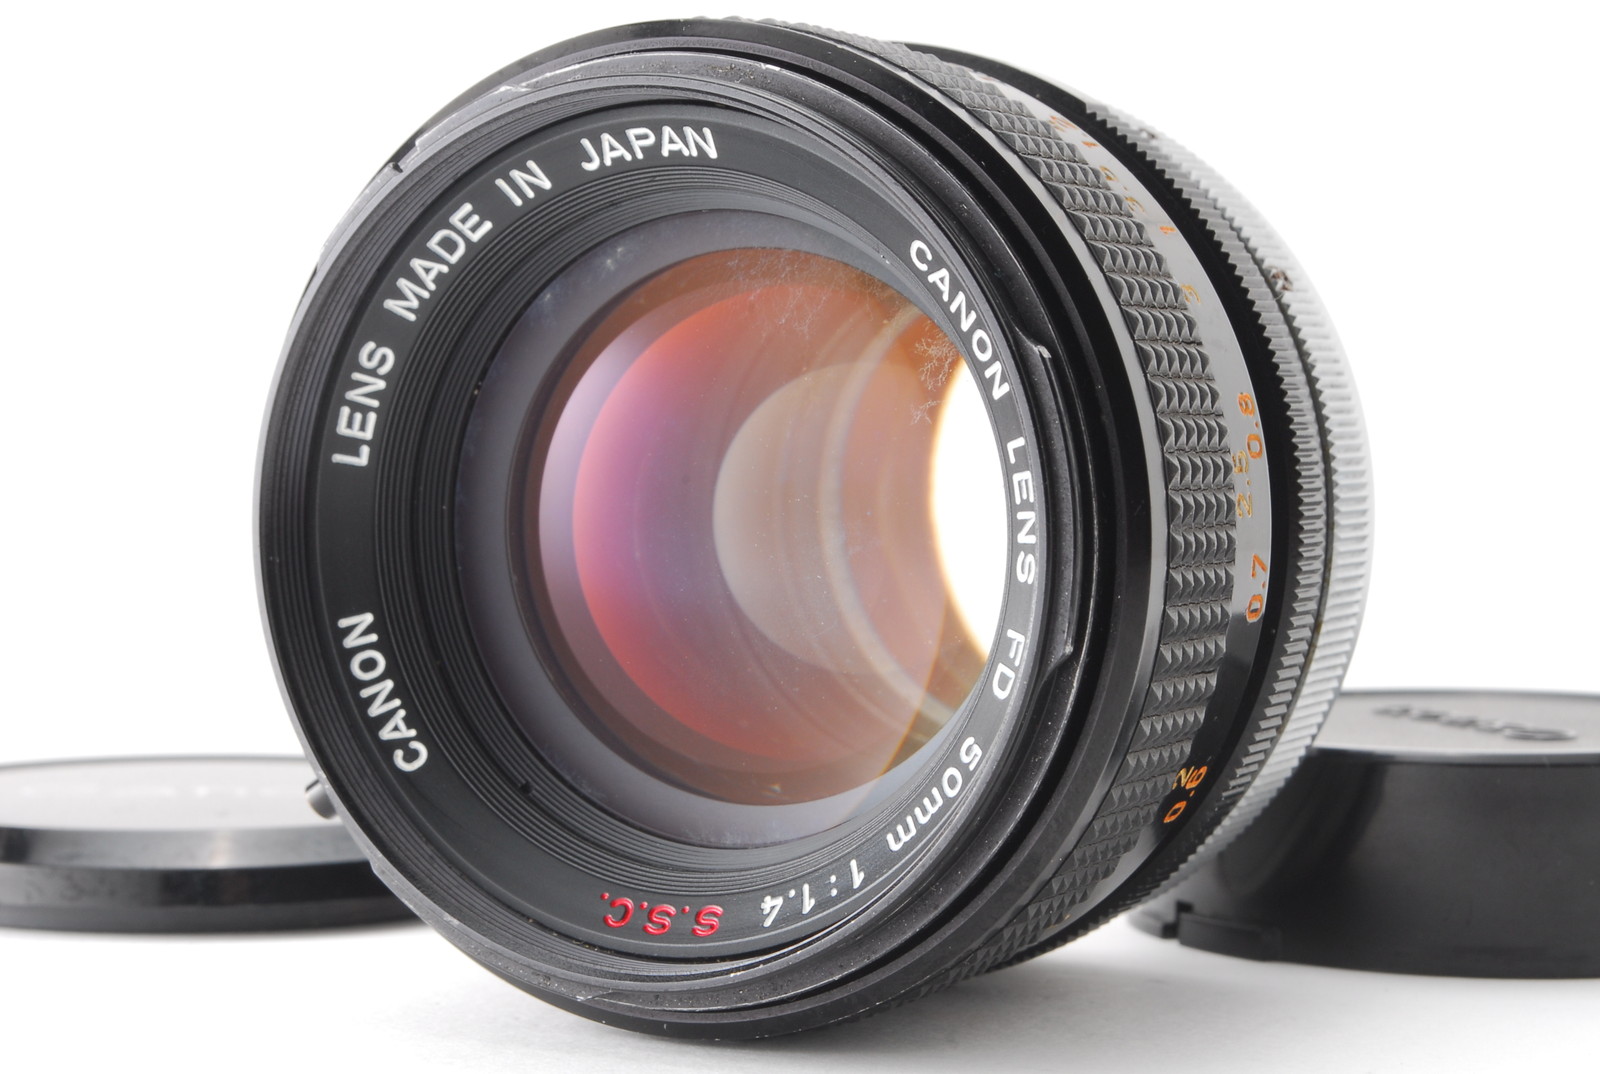 Canon – Products Japan